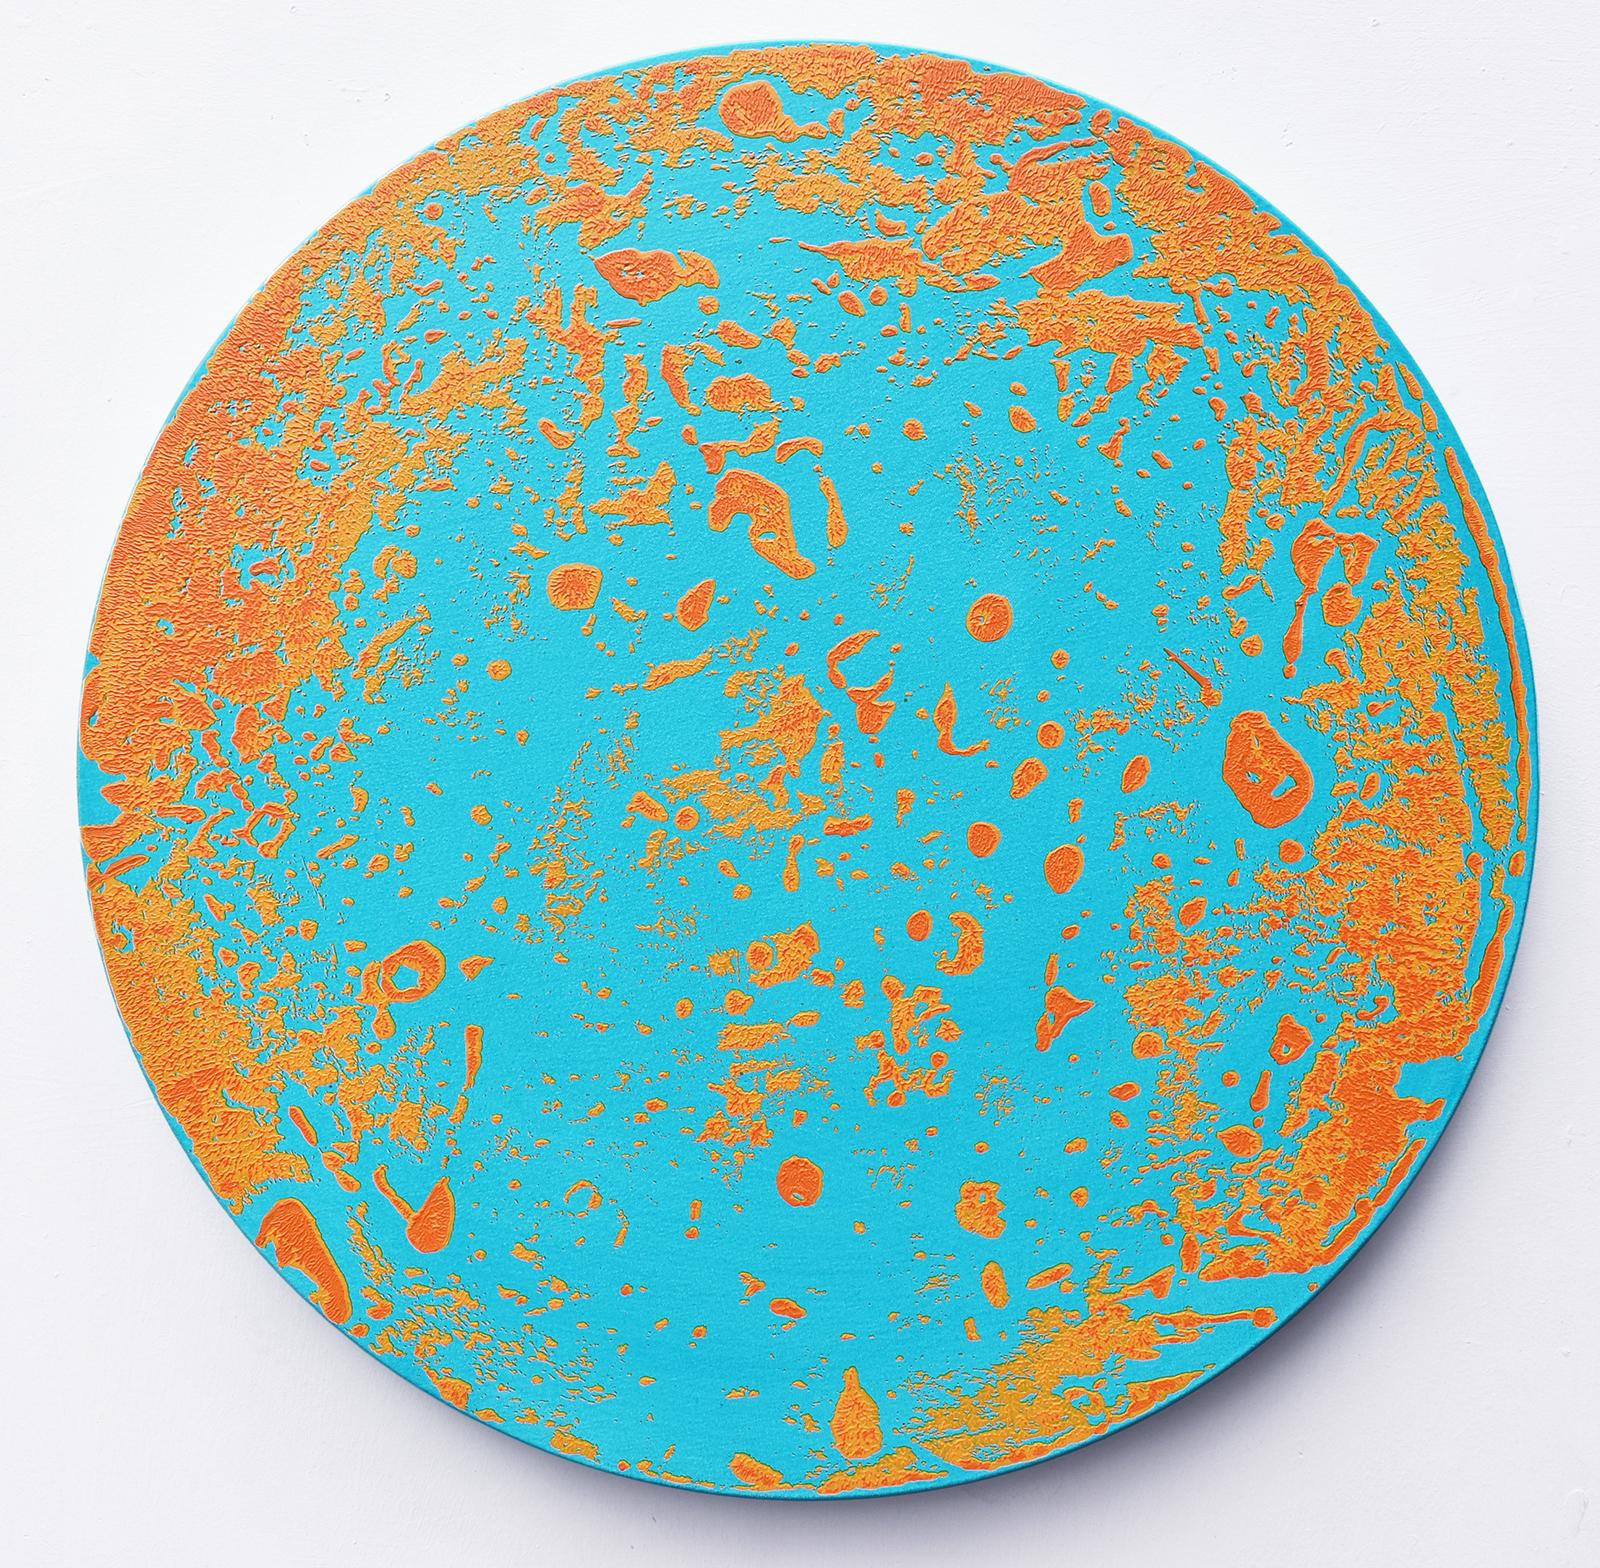 P20-0604, Circular Abstract Painting Bright Turquoise Blue, Yellow Orange